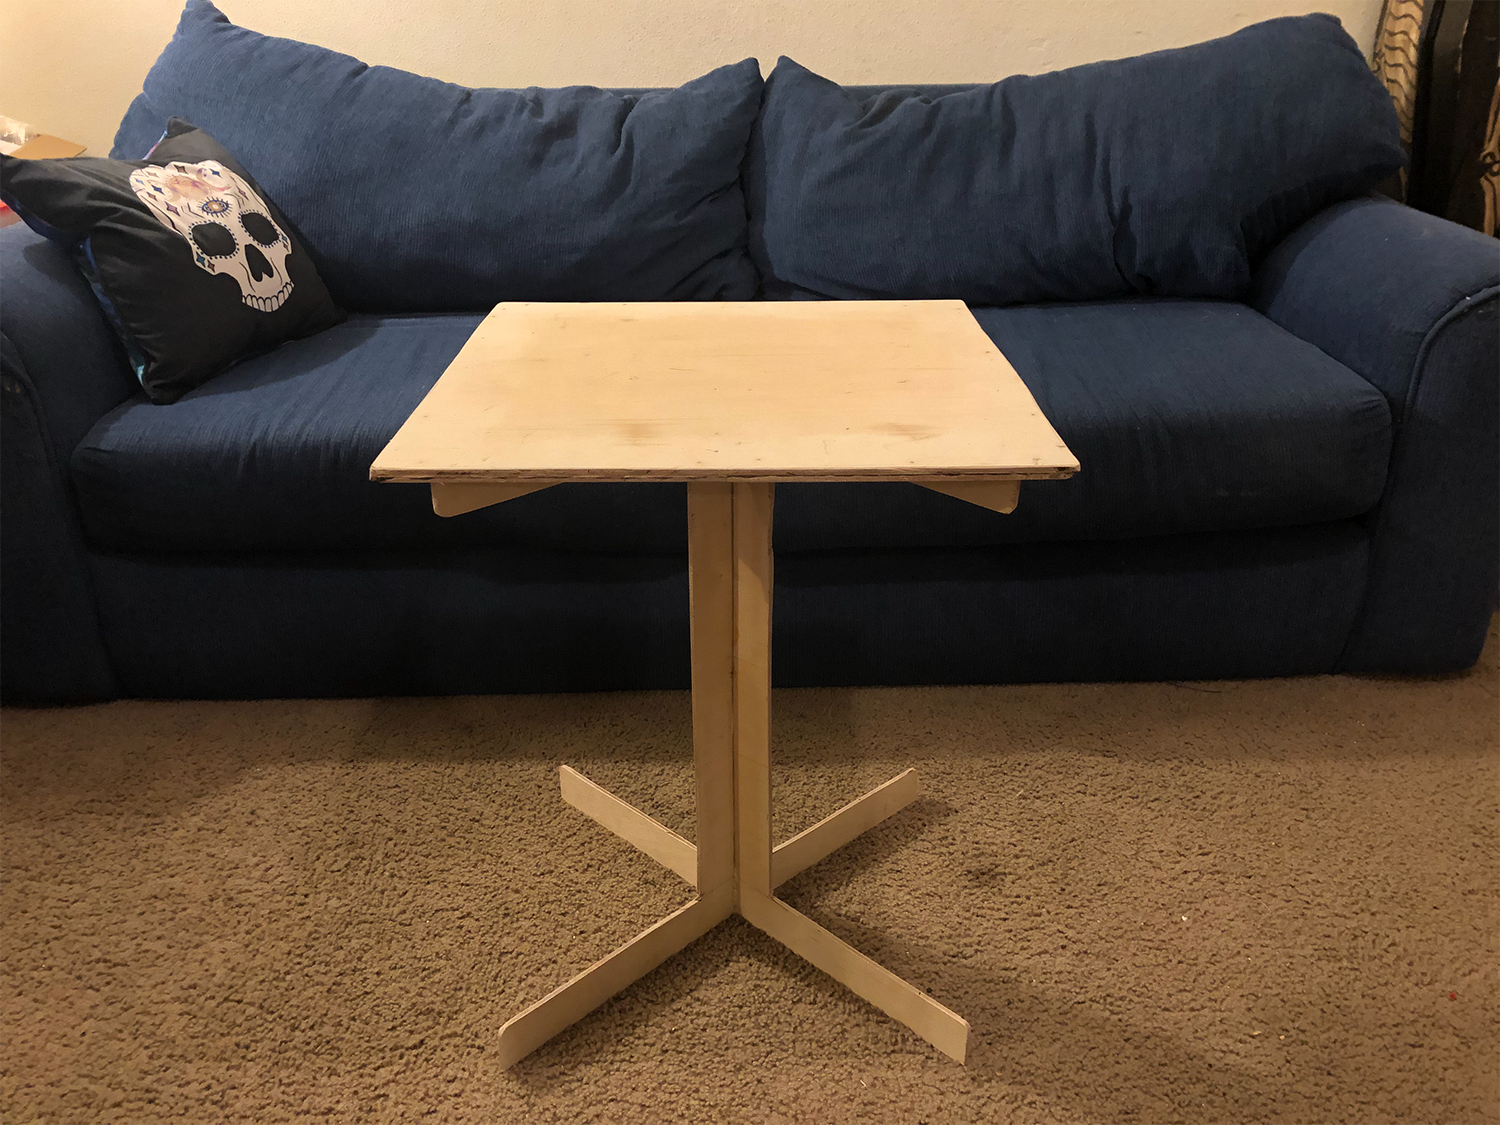 Table From a 2' X 4' Board